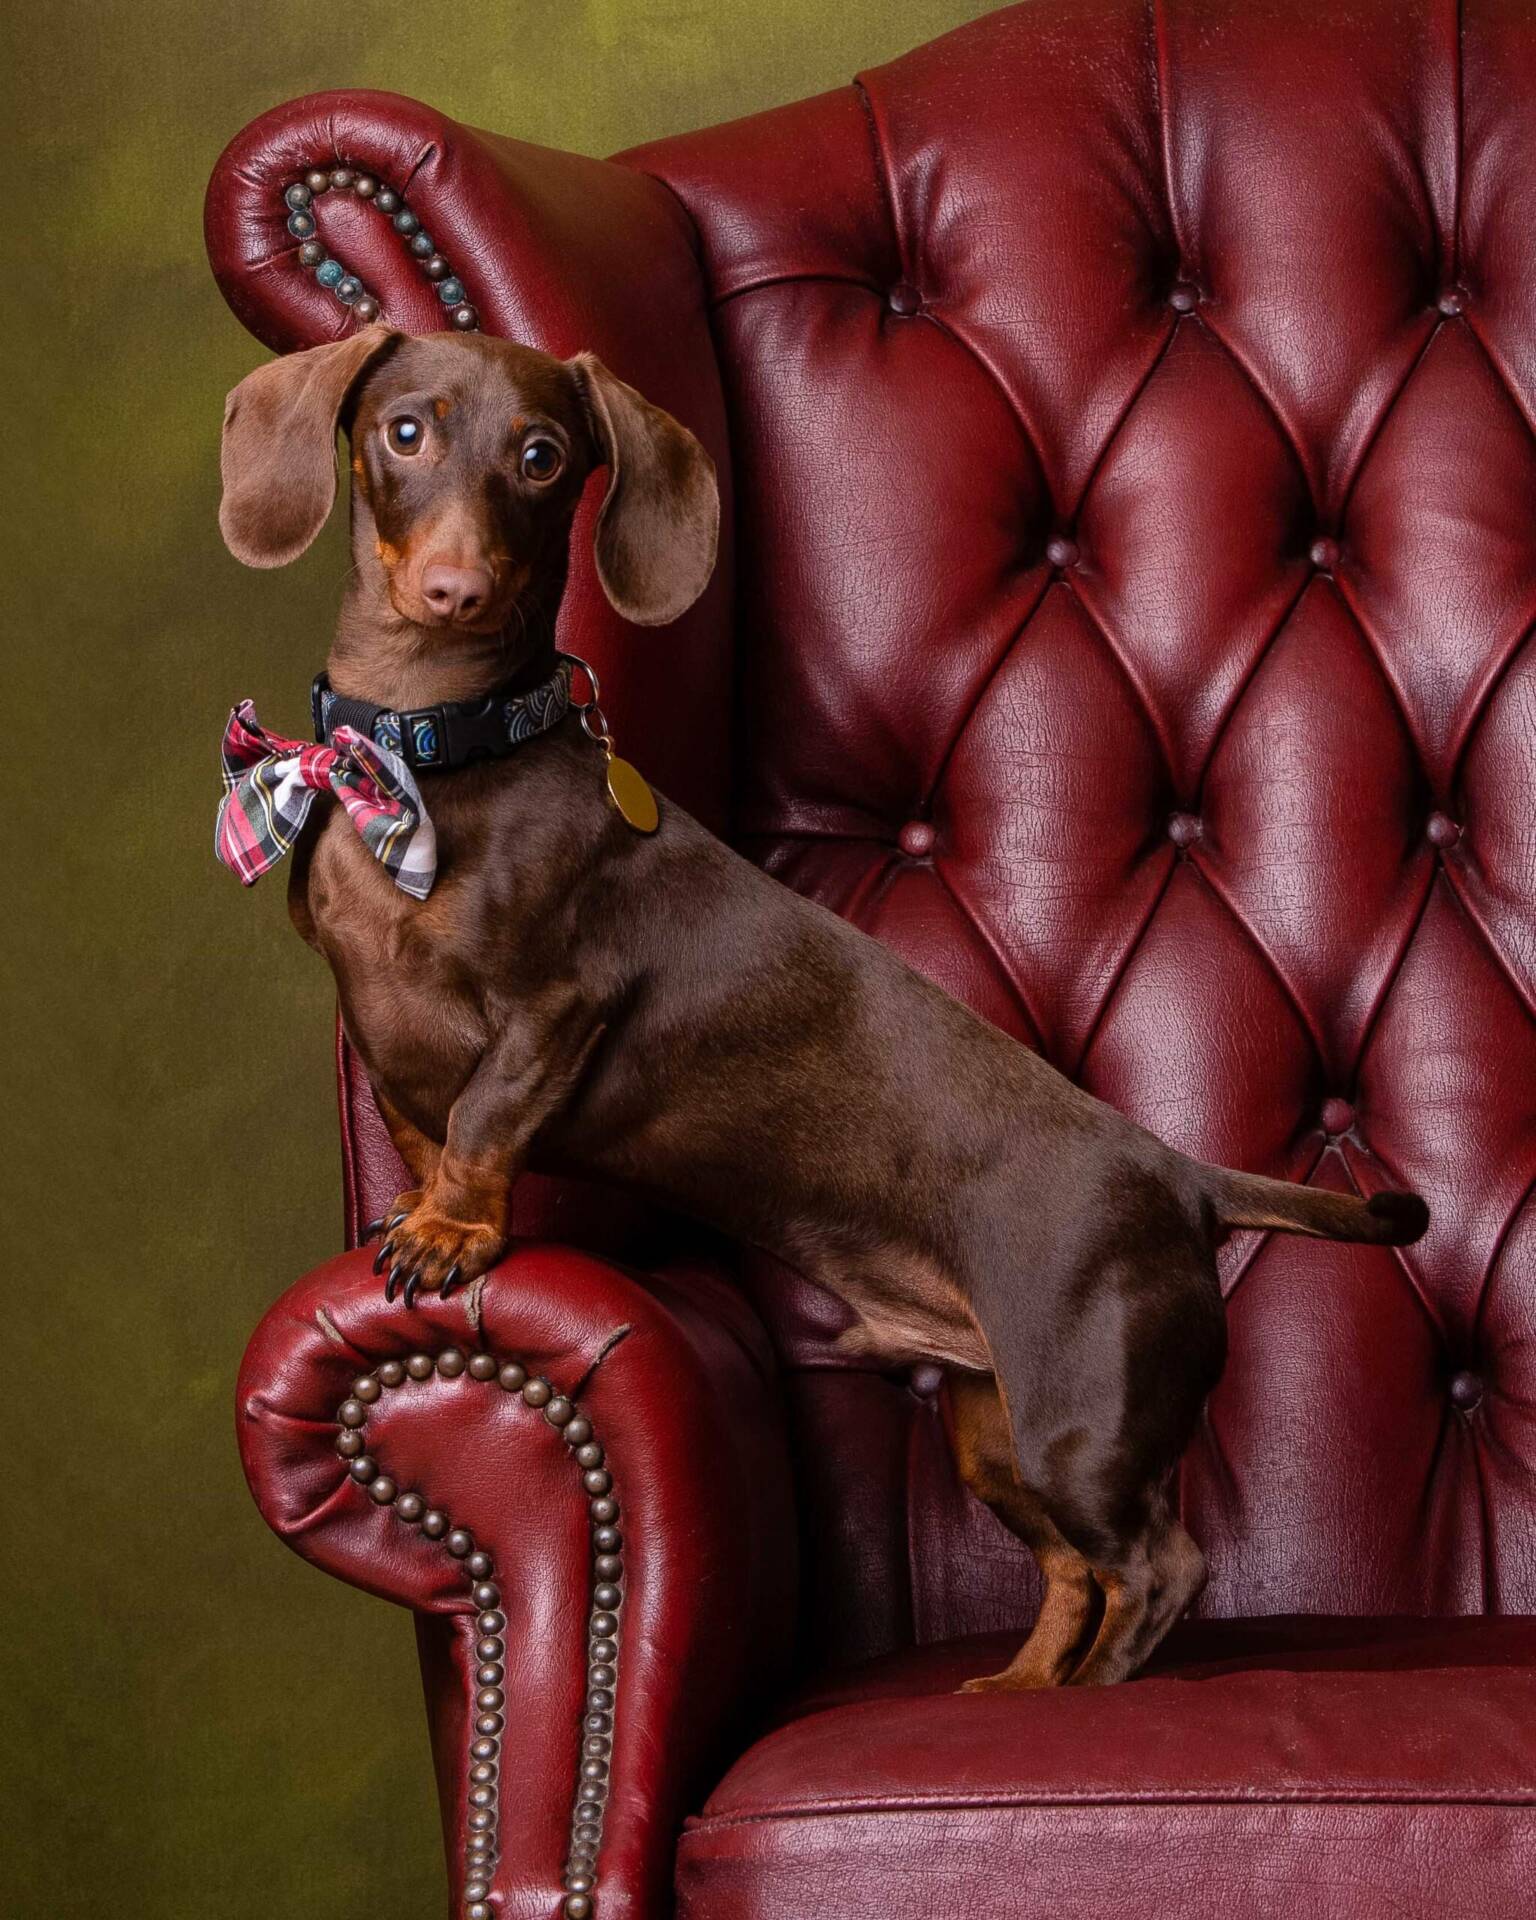 Dachshund on a Chesterfield Chair by Mark Hewitson Photography of Thame, Oxfordshire